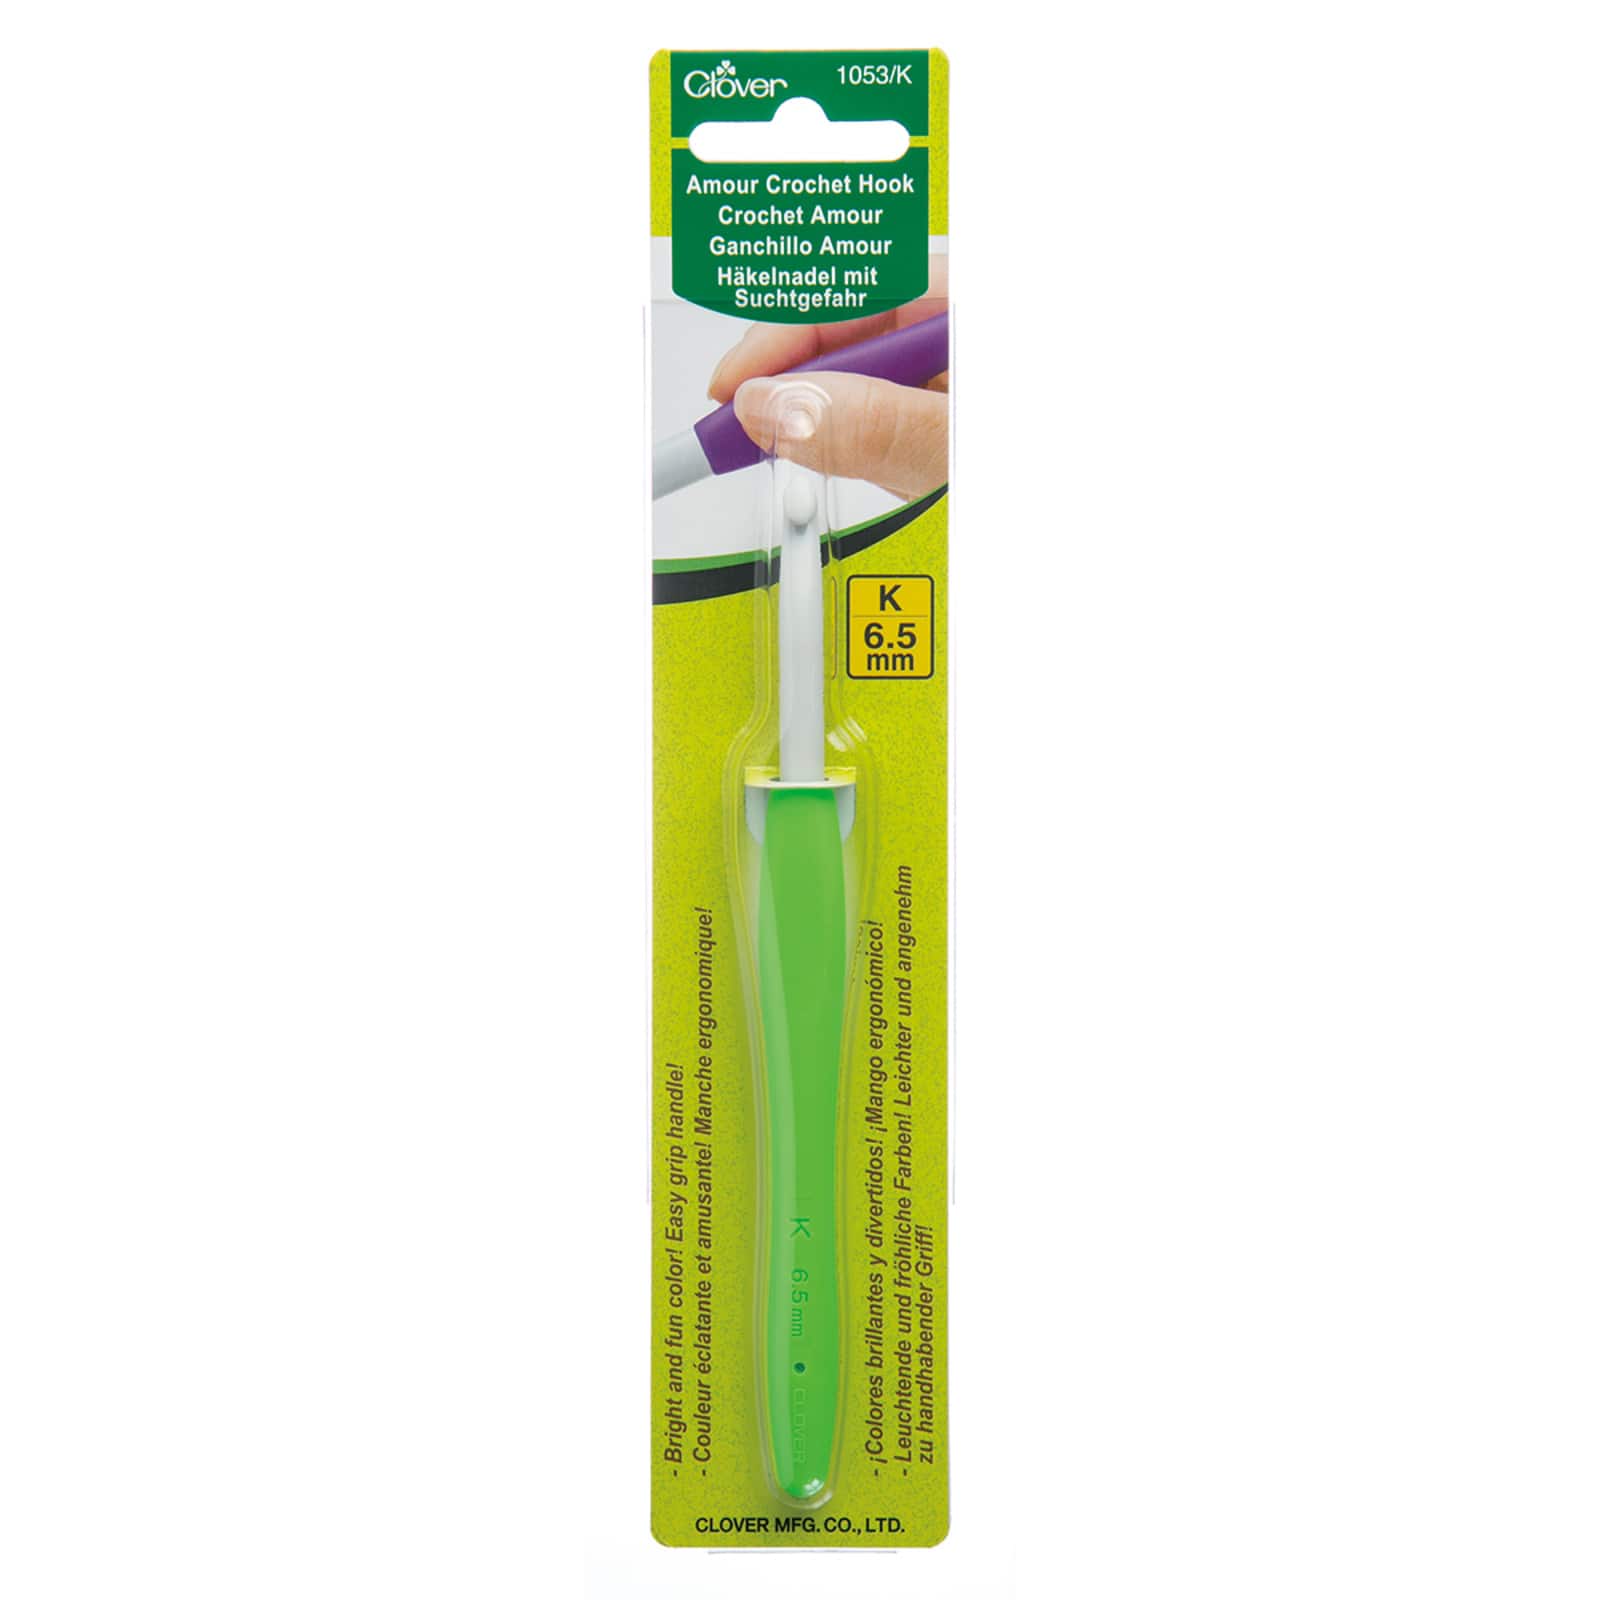 Find the Clover Amour Crochet Hook Set at Michaels